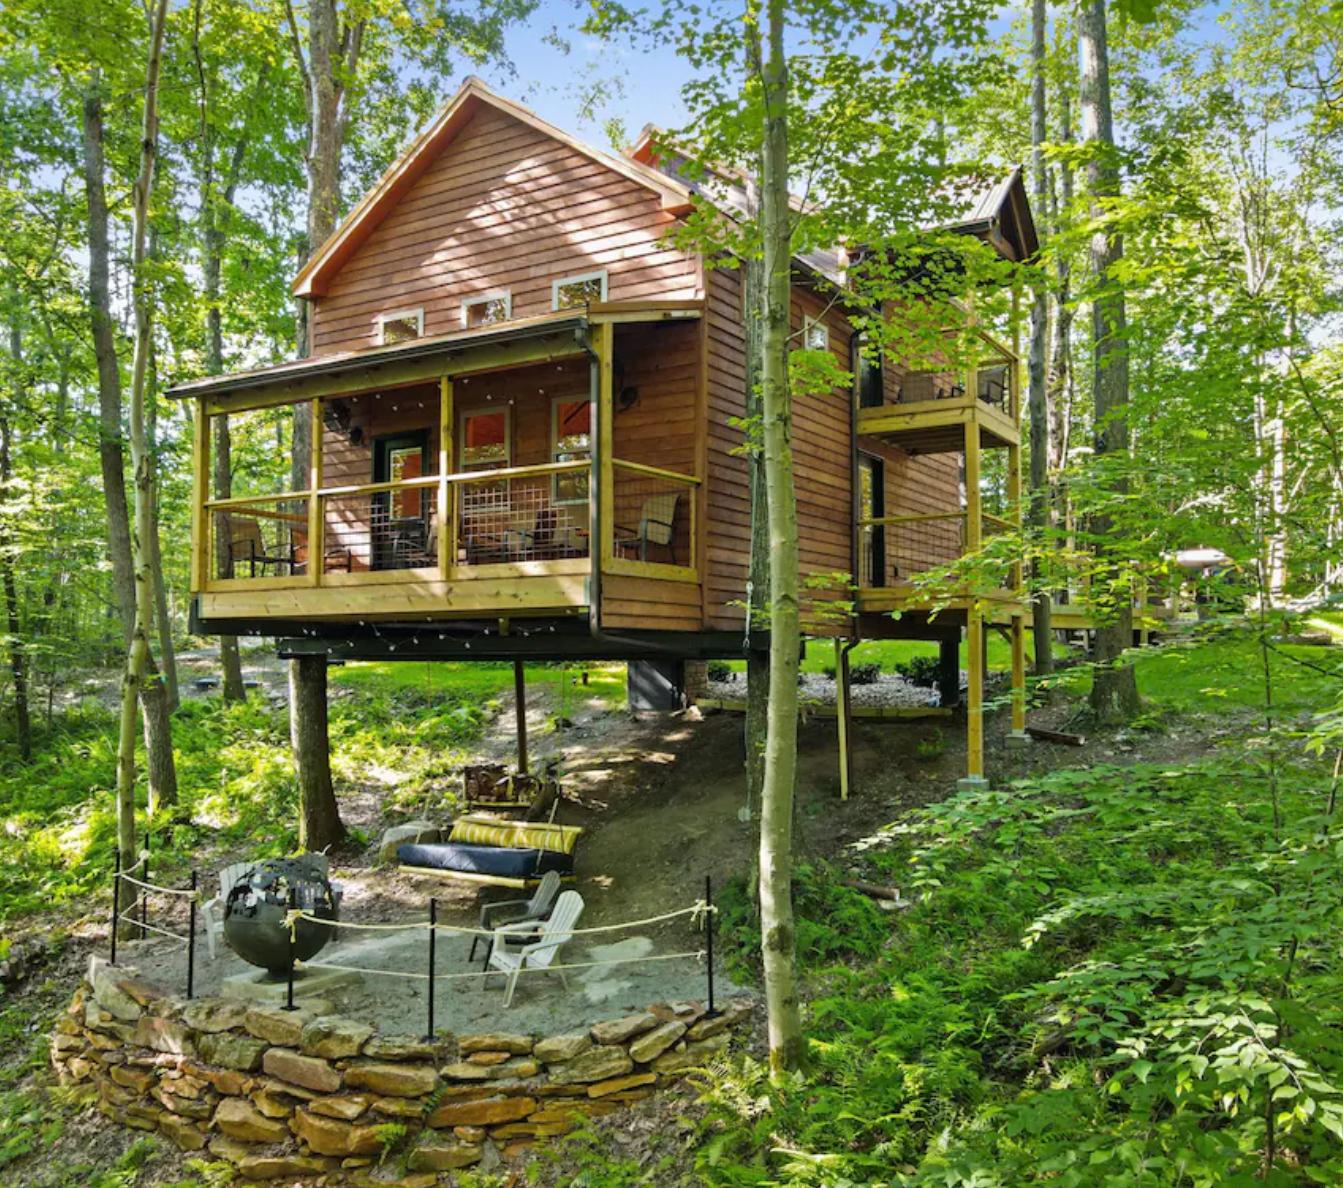 Ohiopyle Luxury Treehouse - Best Pennsylvania Treehouse Rental for Families with a Hot Tub